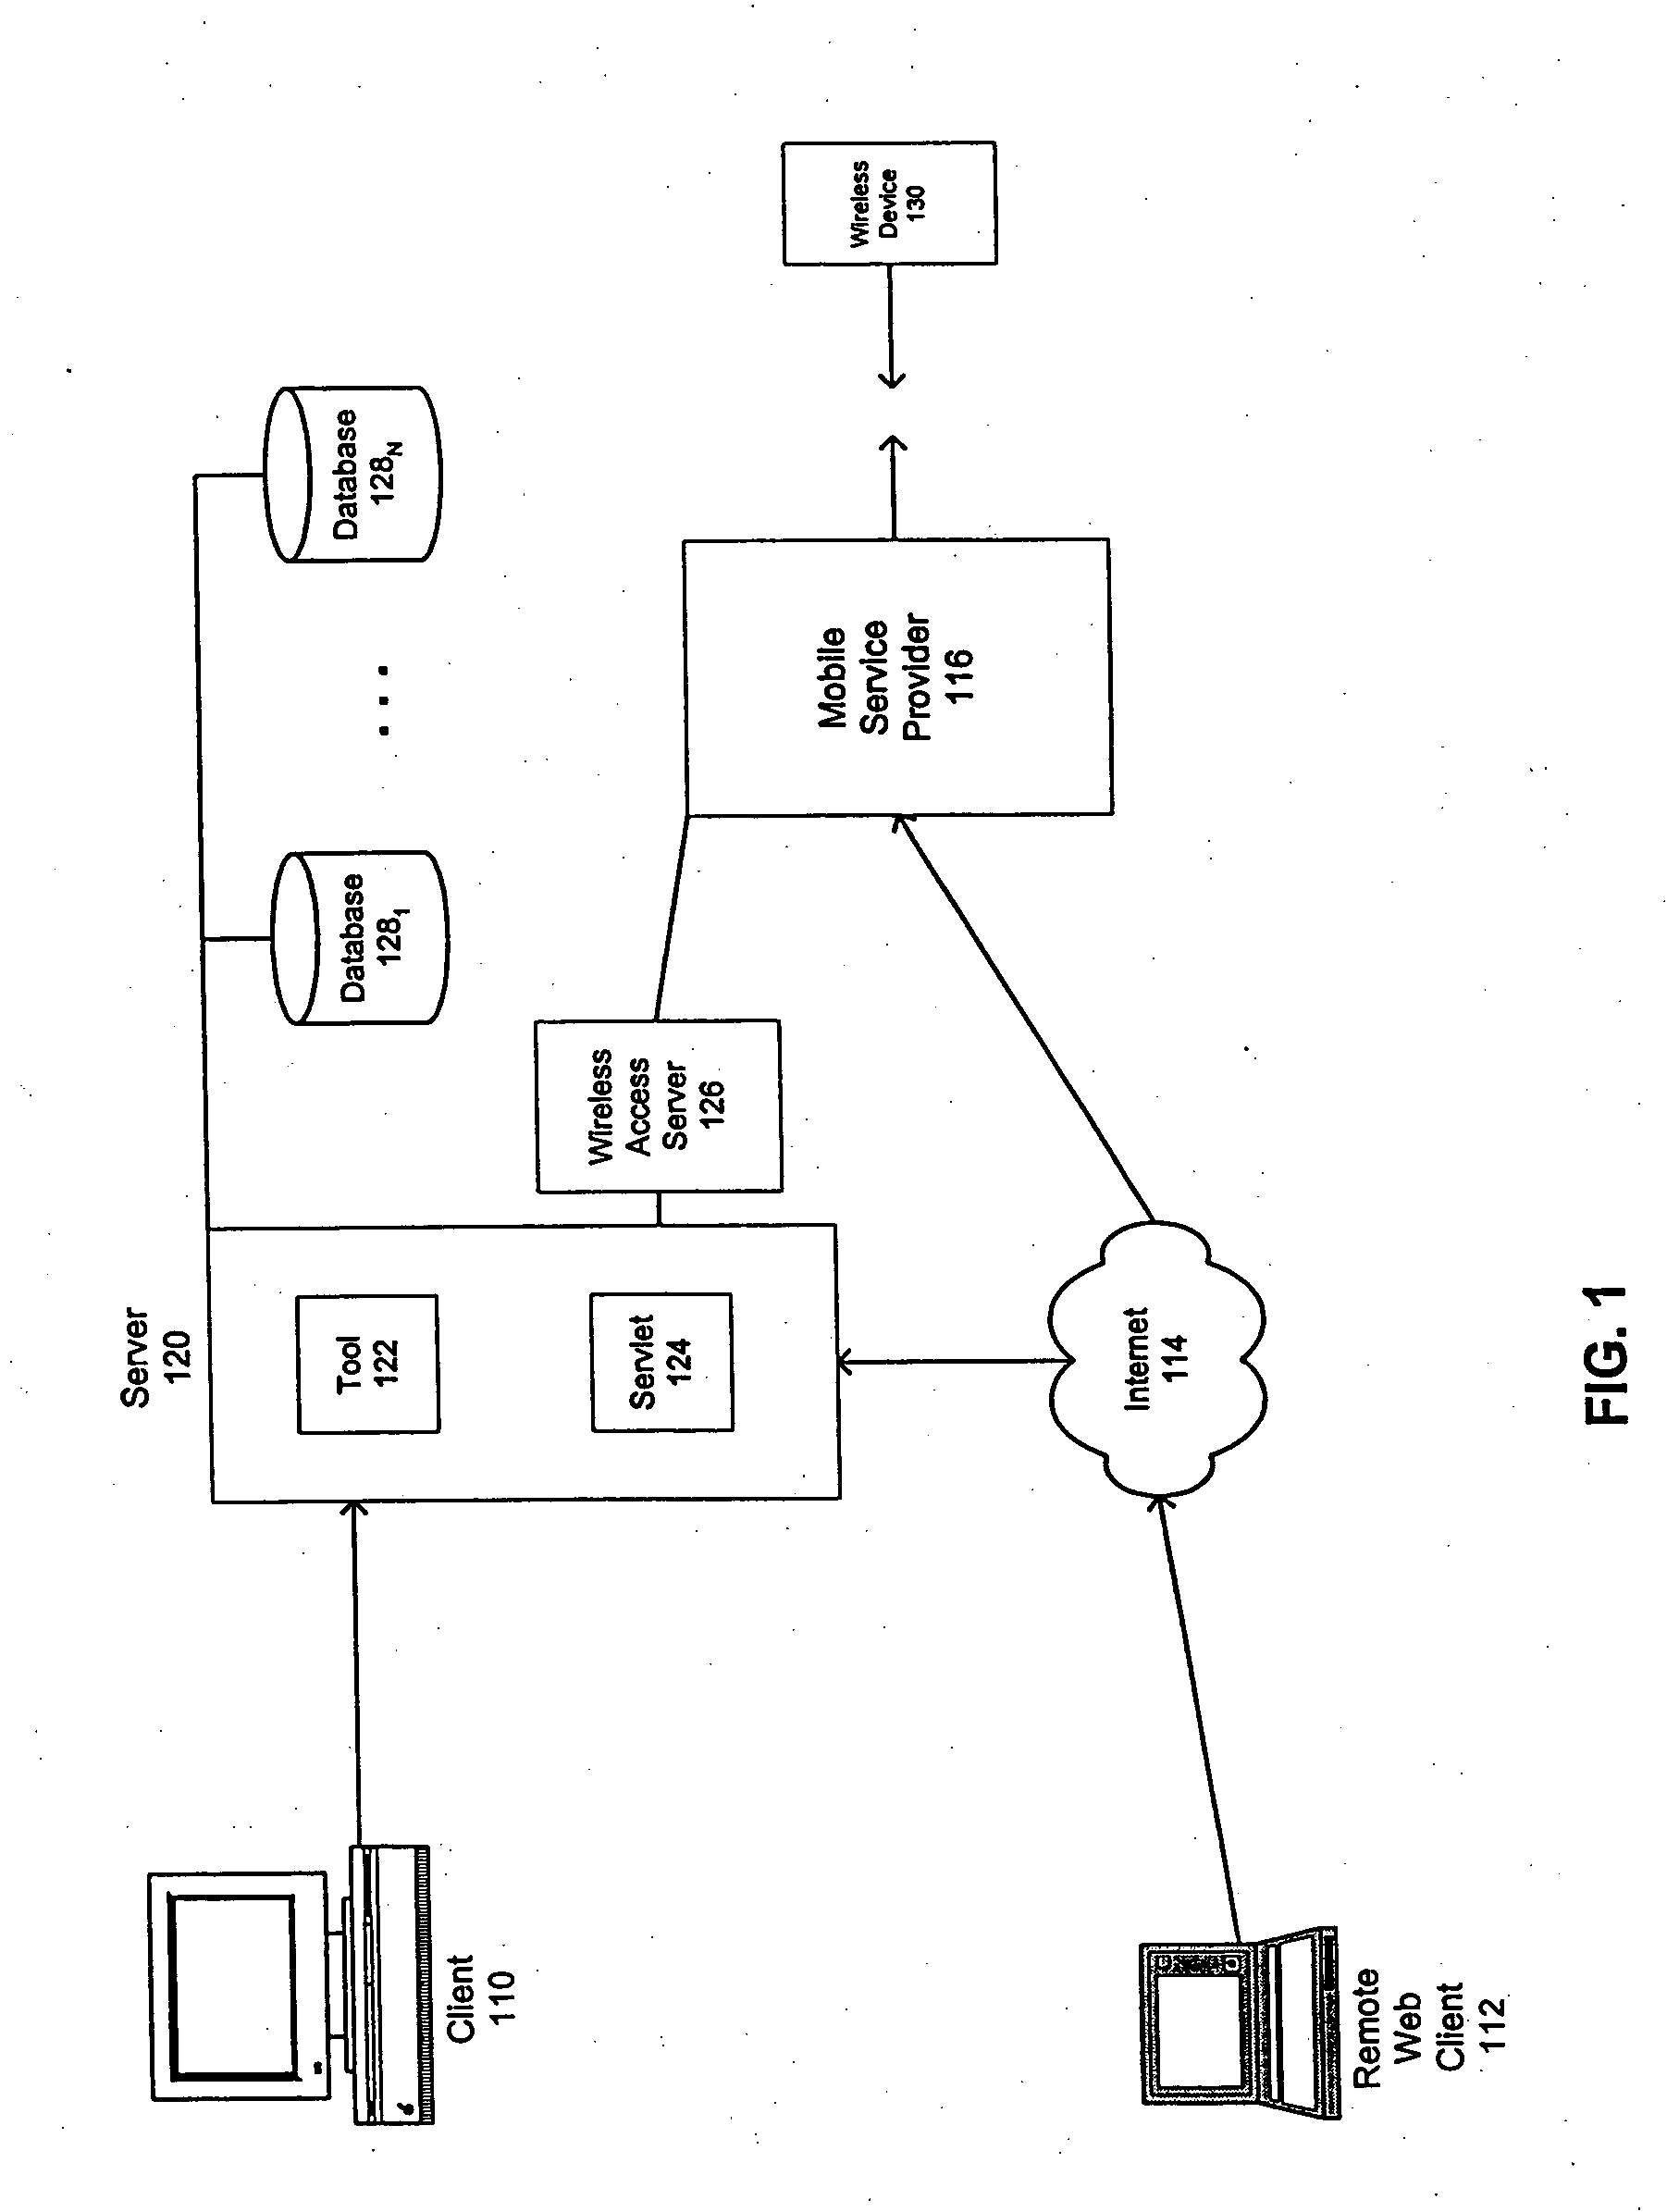 System and method for providing wireless device access to e-mail applications